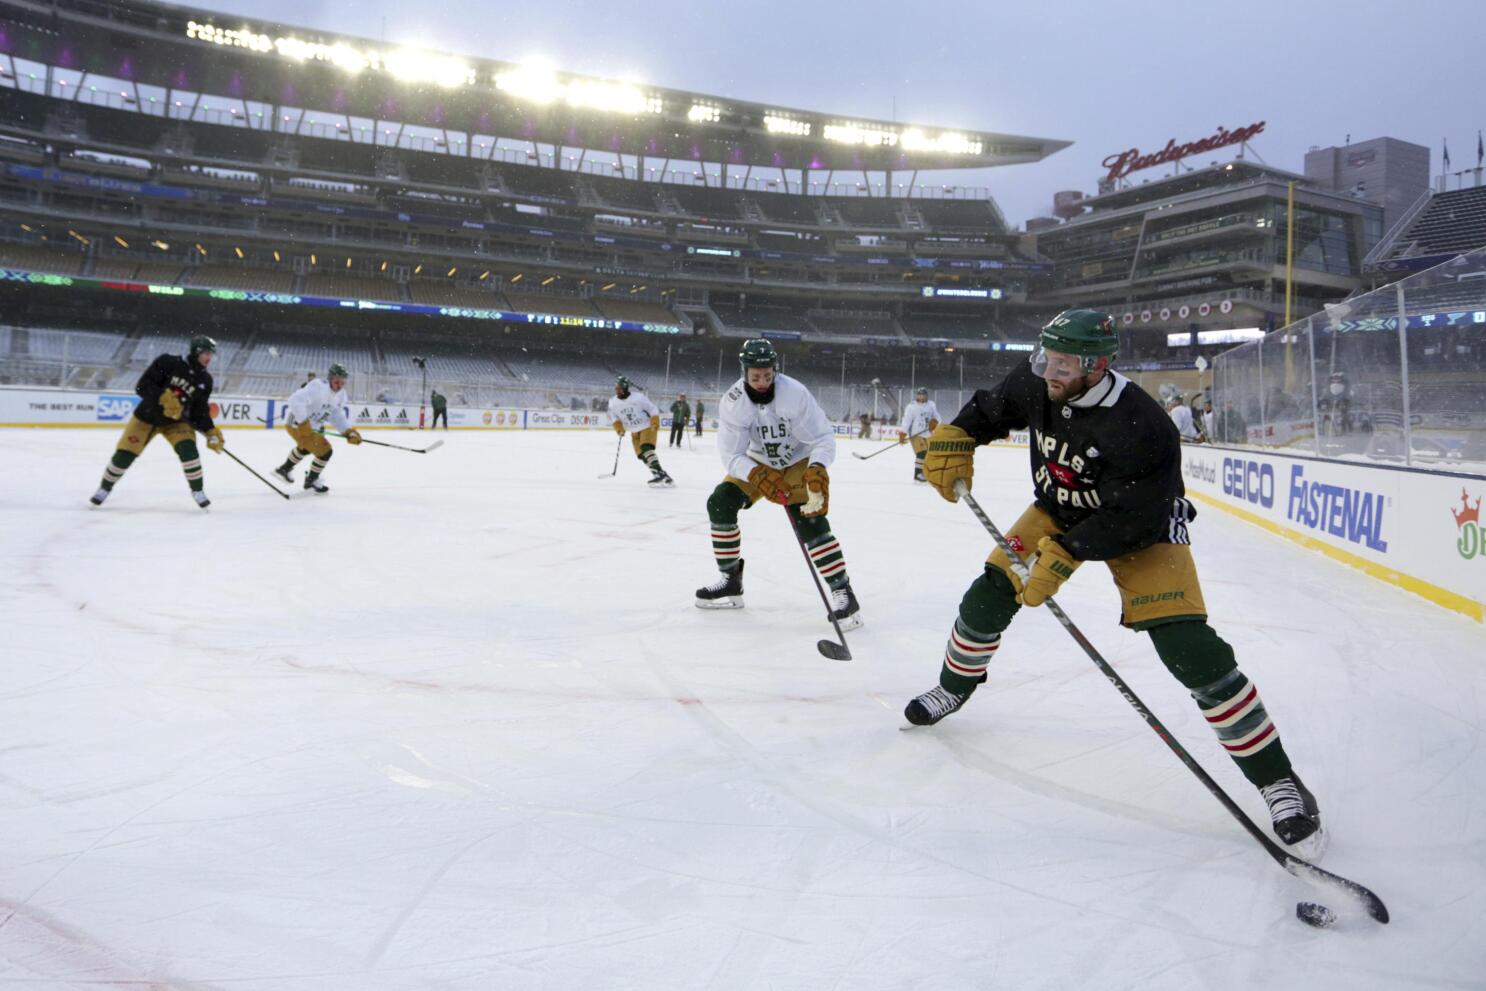 Pittsburgh Penguins on X: Winter Classic, here we come! We'll see